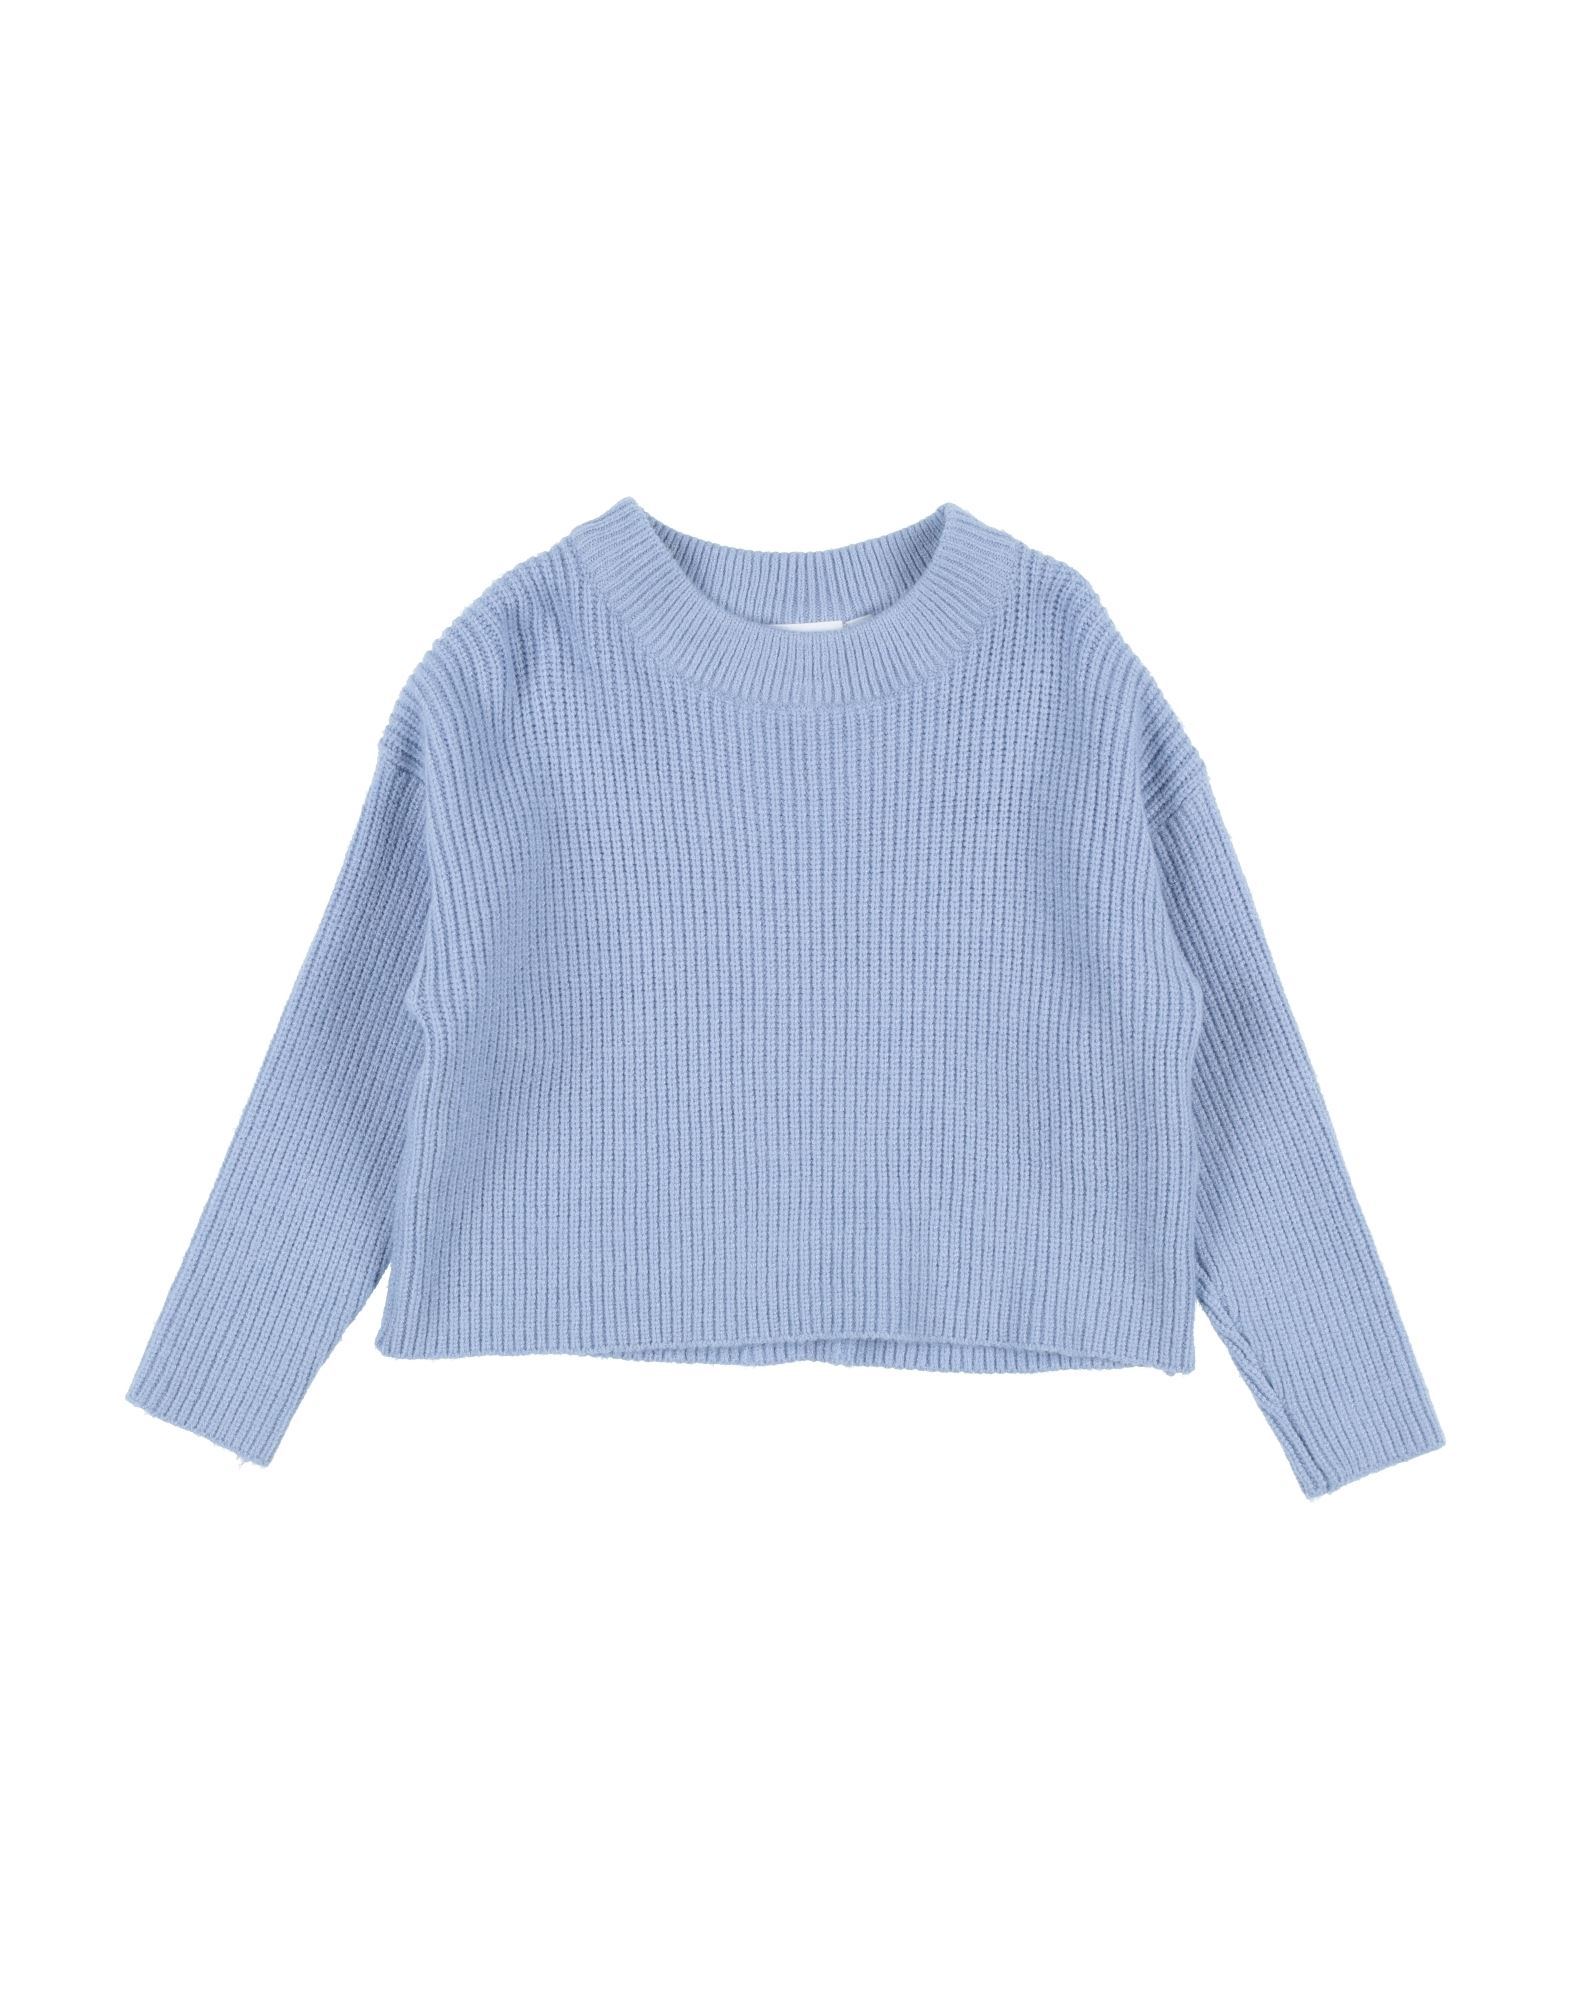 NAME IT® Pullover Kinder Lila von NAME IT®